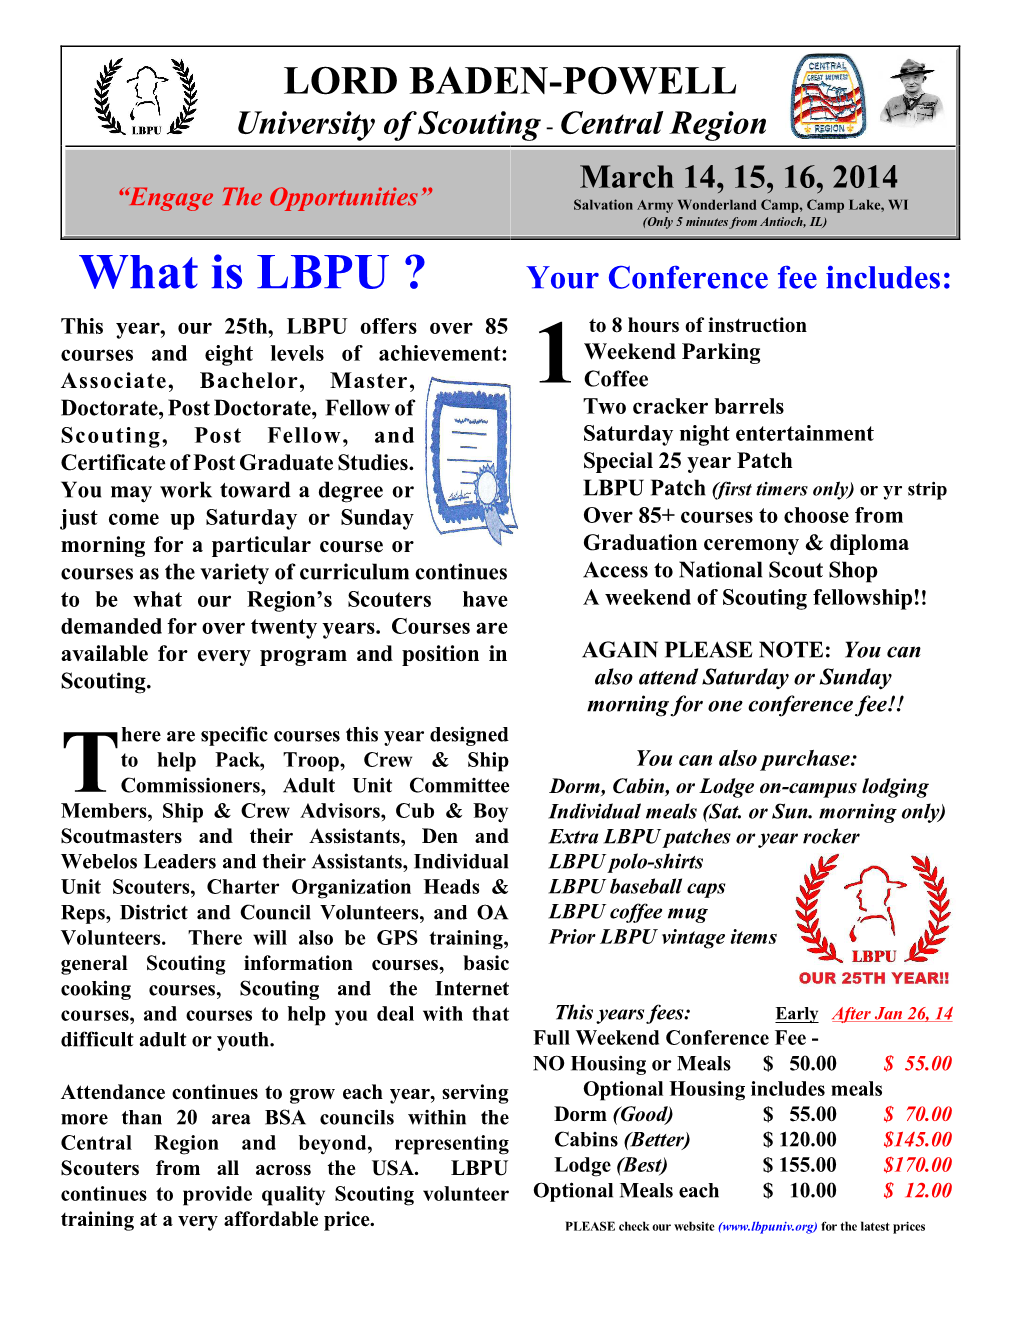 What Is LBPU ?